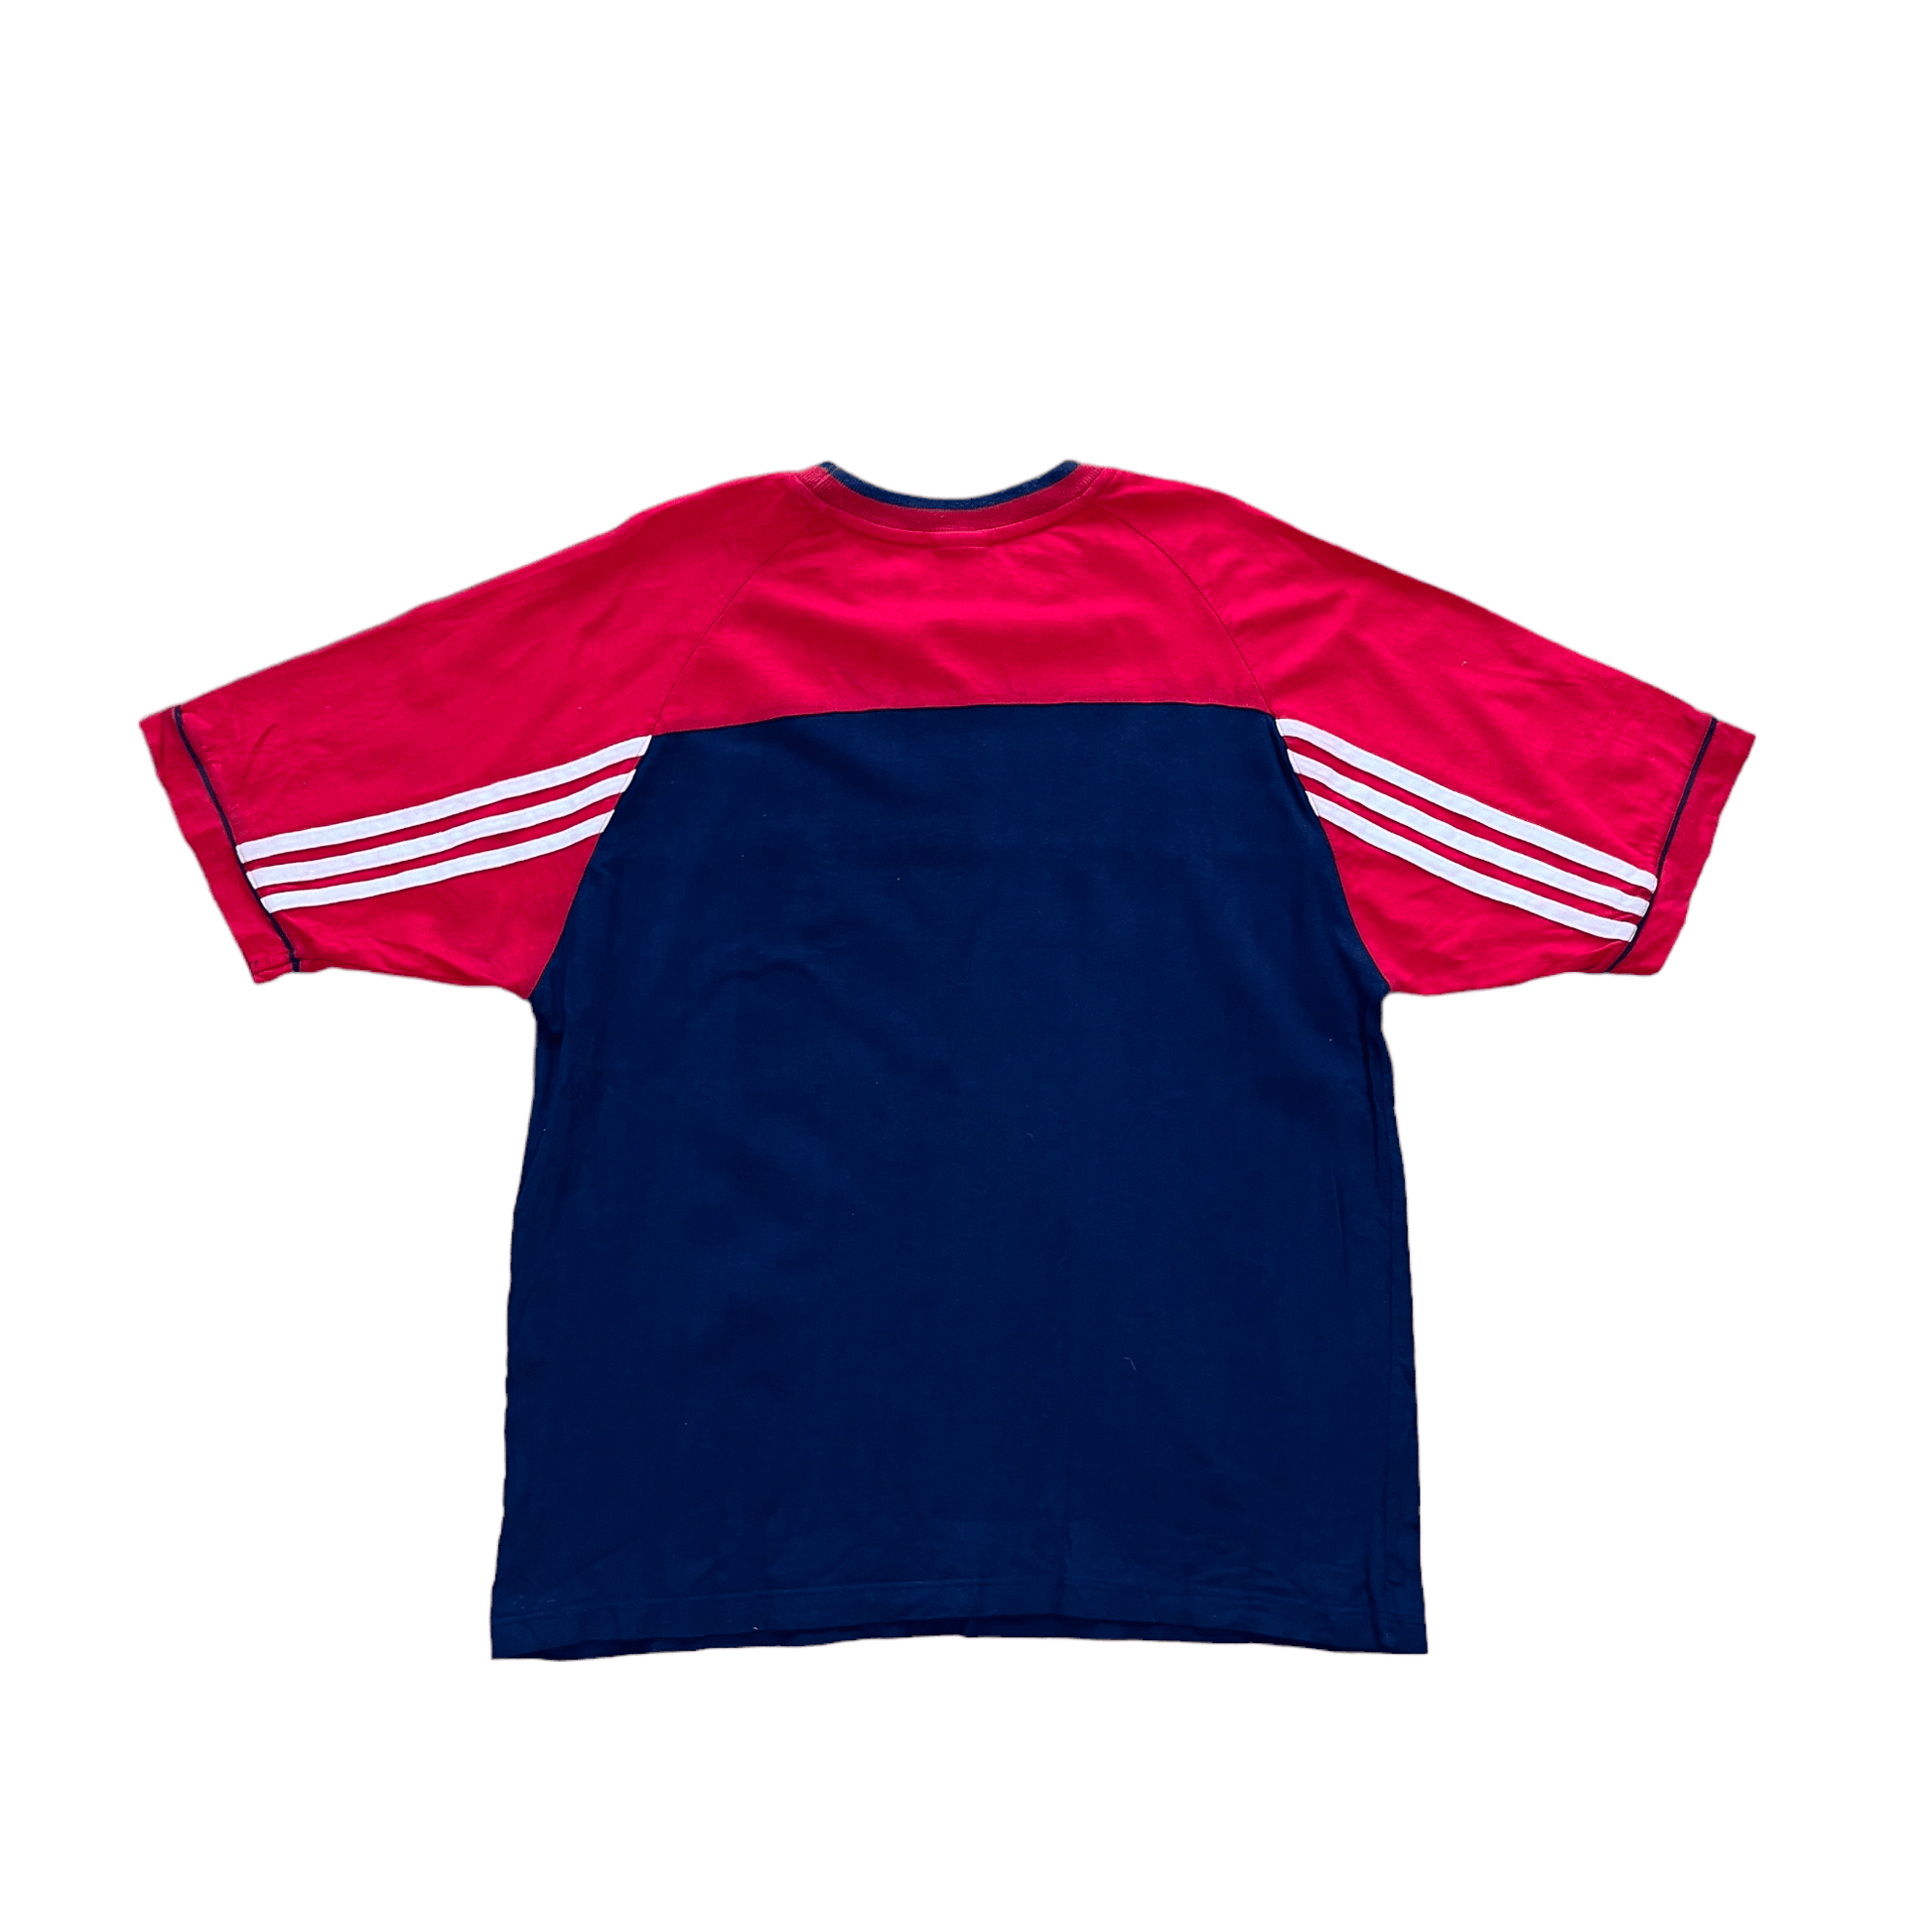 Vintage 90s Navy Blue, Red + White Adidas Tee - Extra Large - The Streetwear Studio